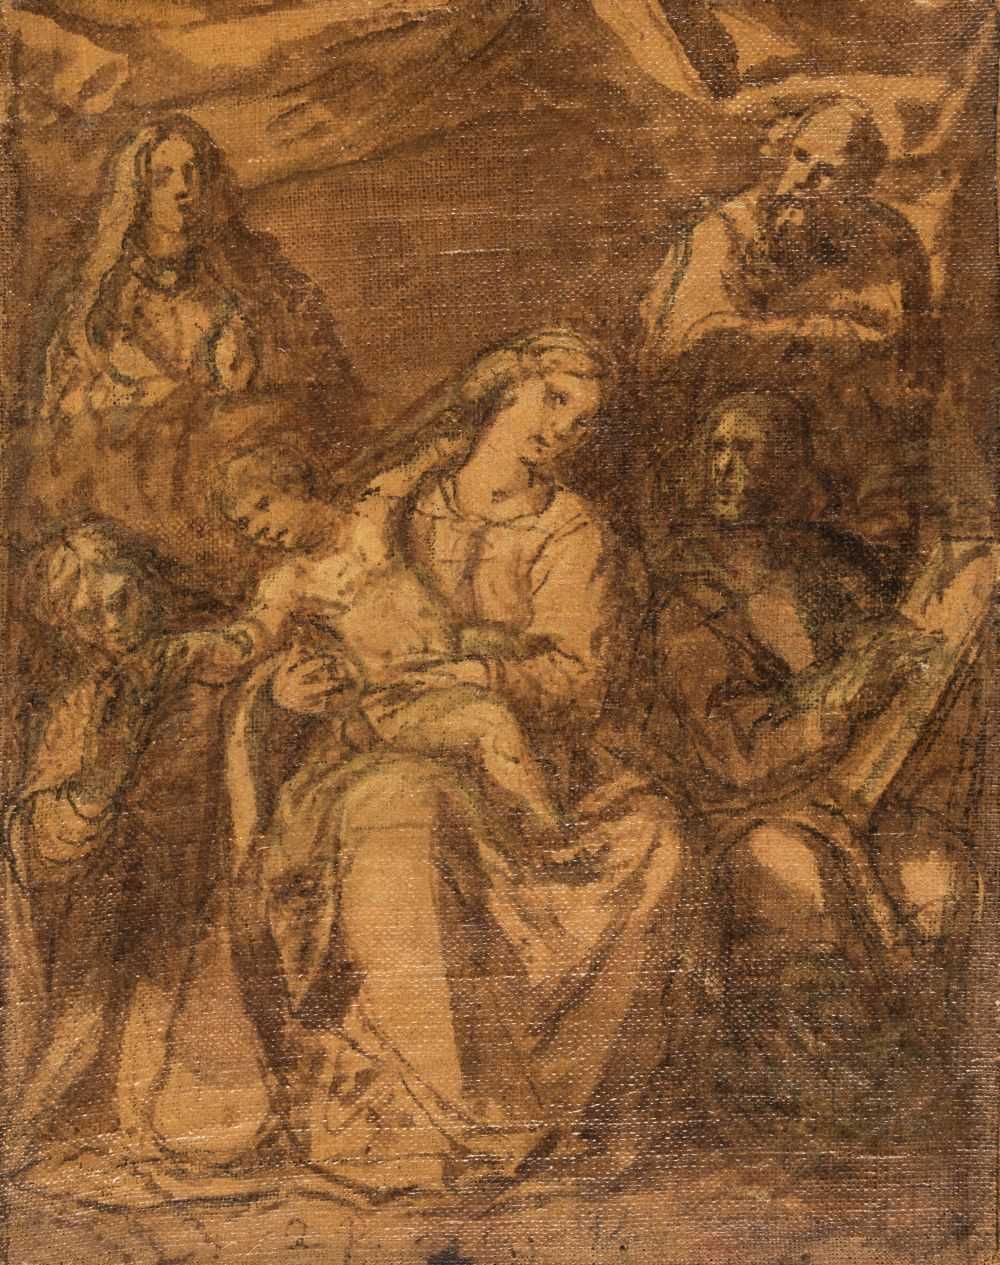 Lot 1 - Carducho (Vicente, 1576-1638). Holy Family with Saints, circa 1630-1638